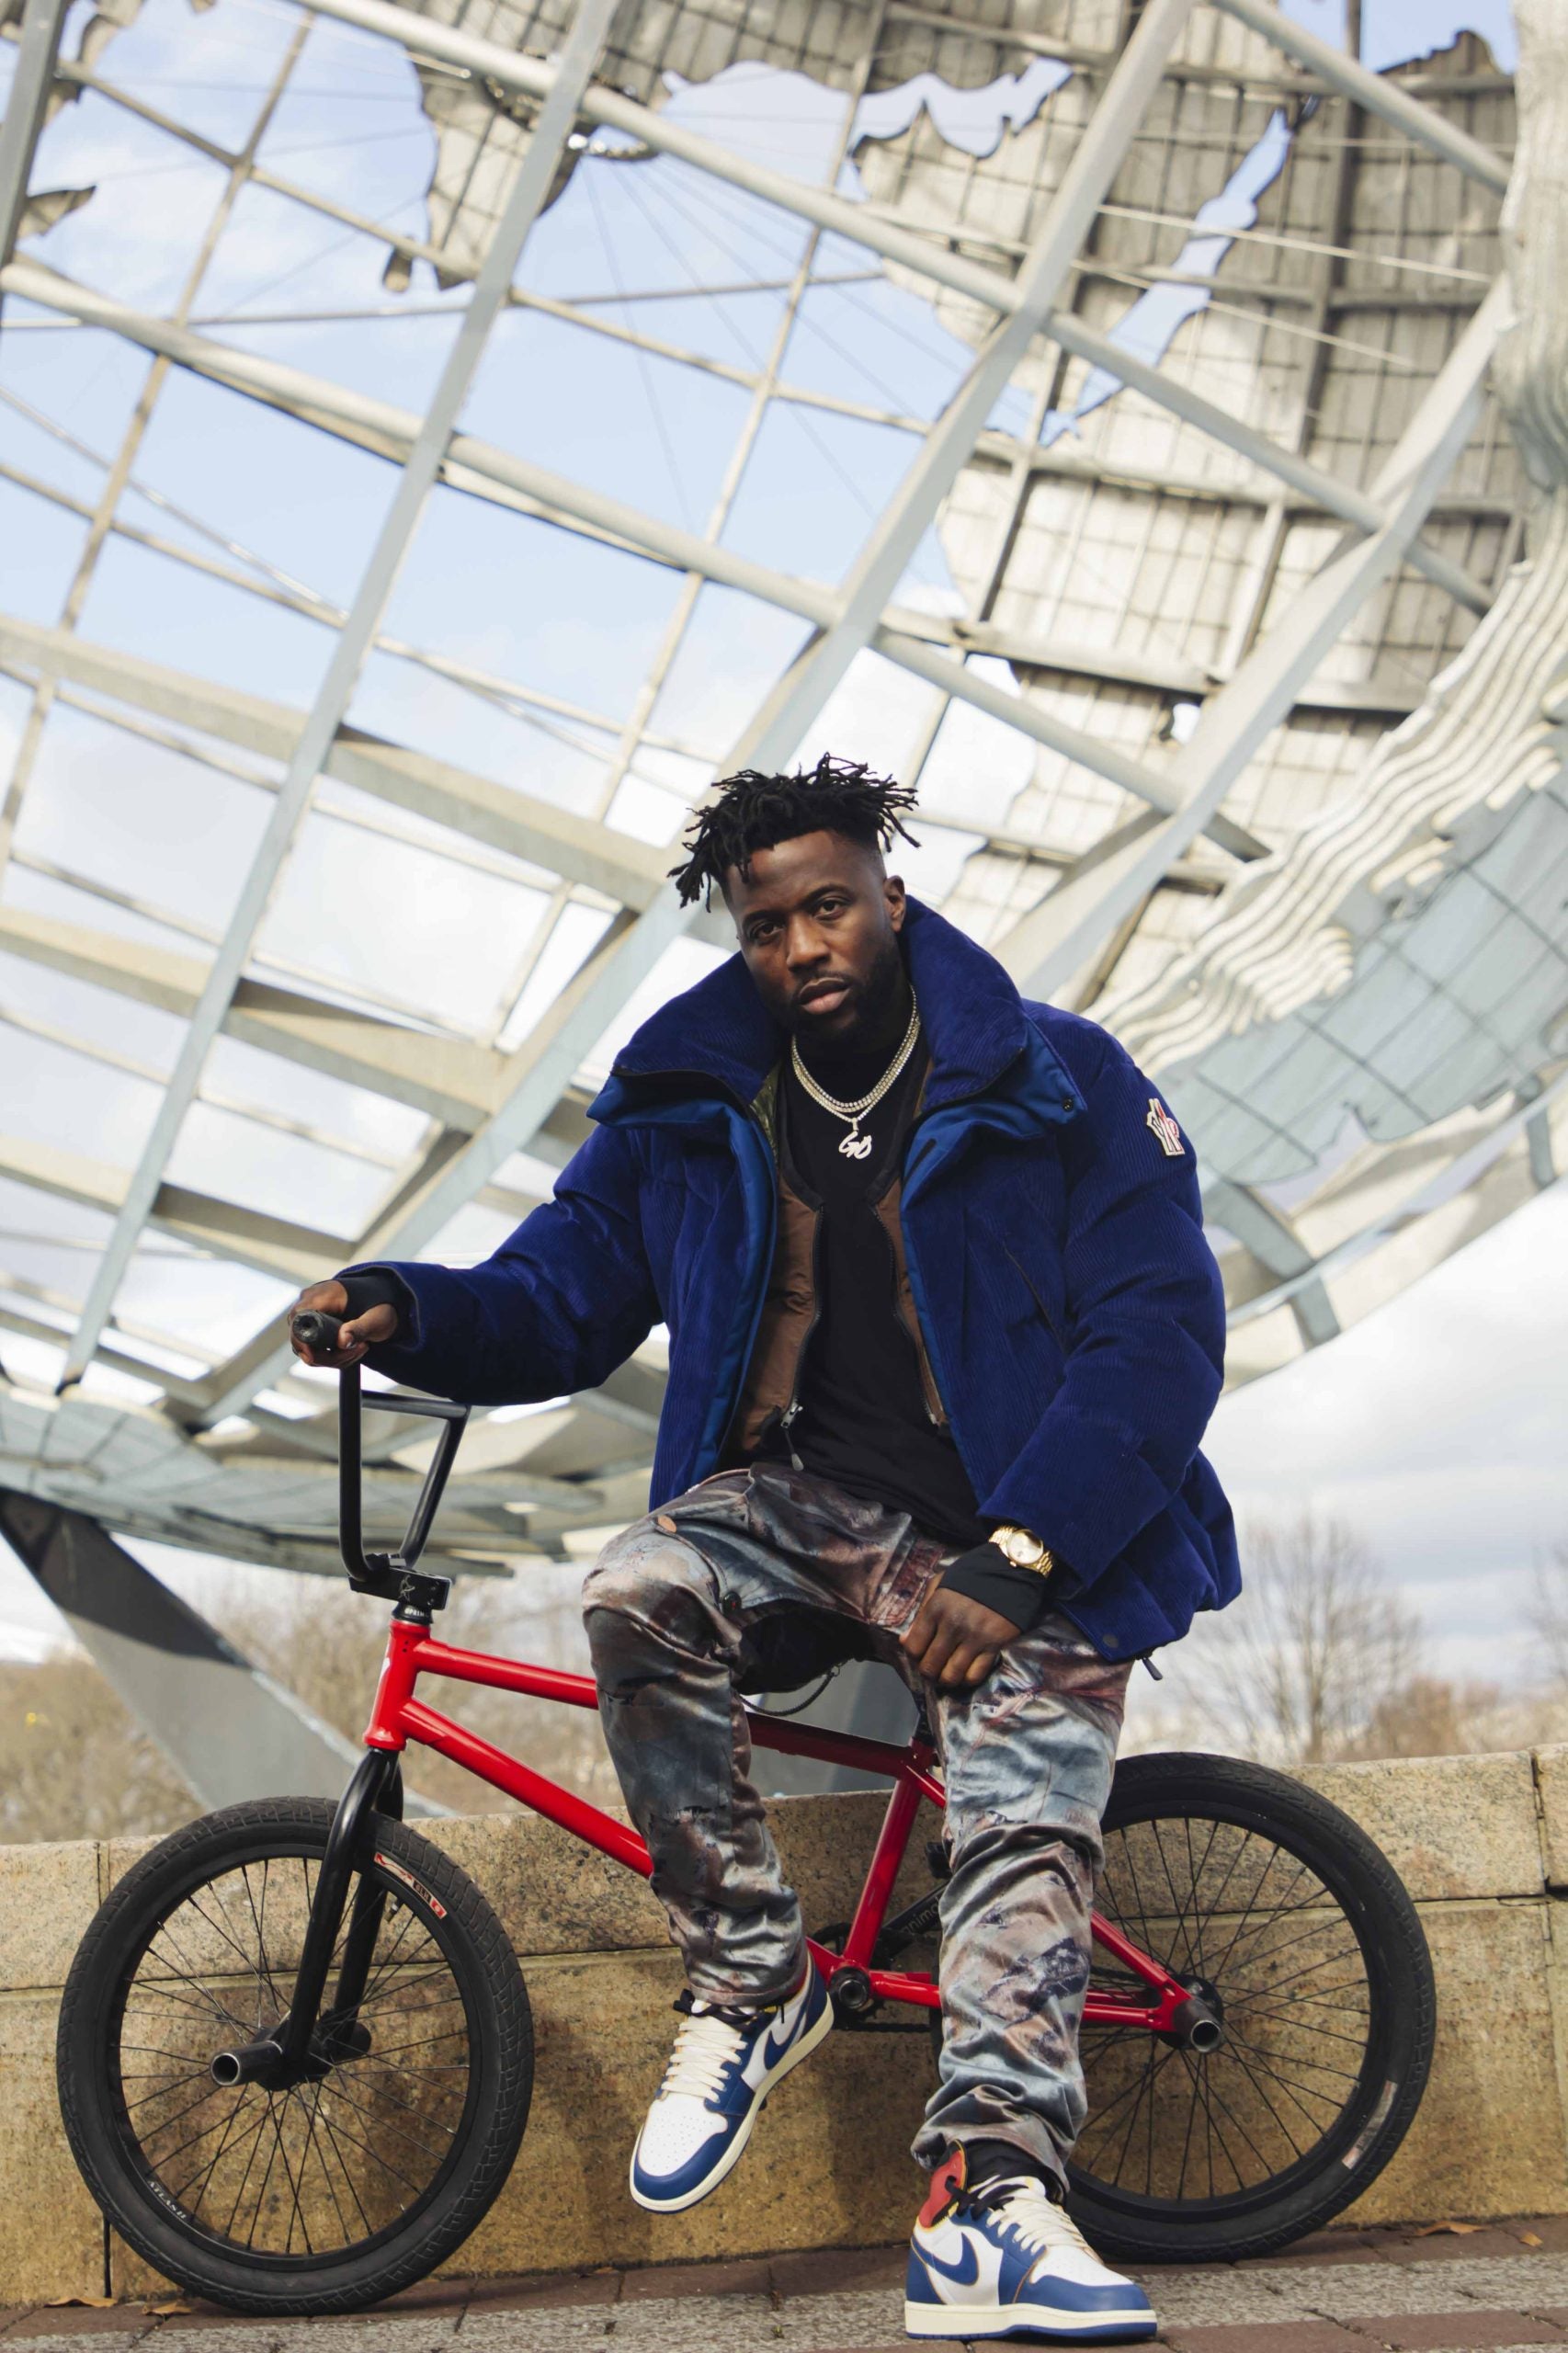 BMX Pro Athlete Nigel Sylvester Is Making Impact Beyond The Sport: Here’s How He’s Using His Platform To Give Back